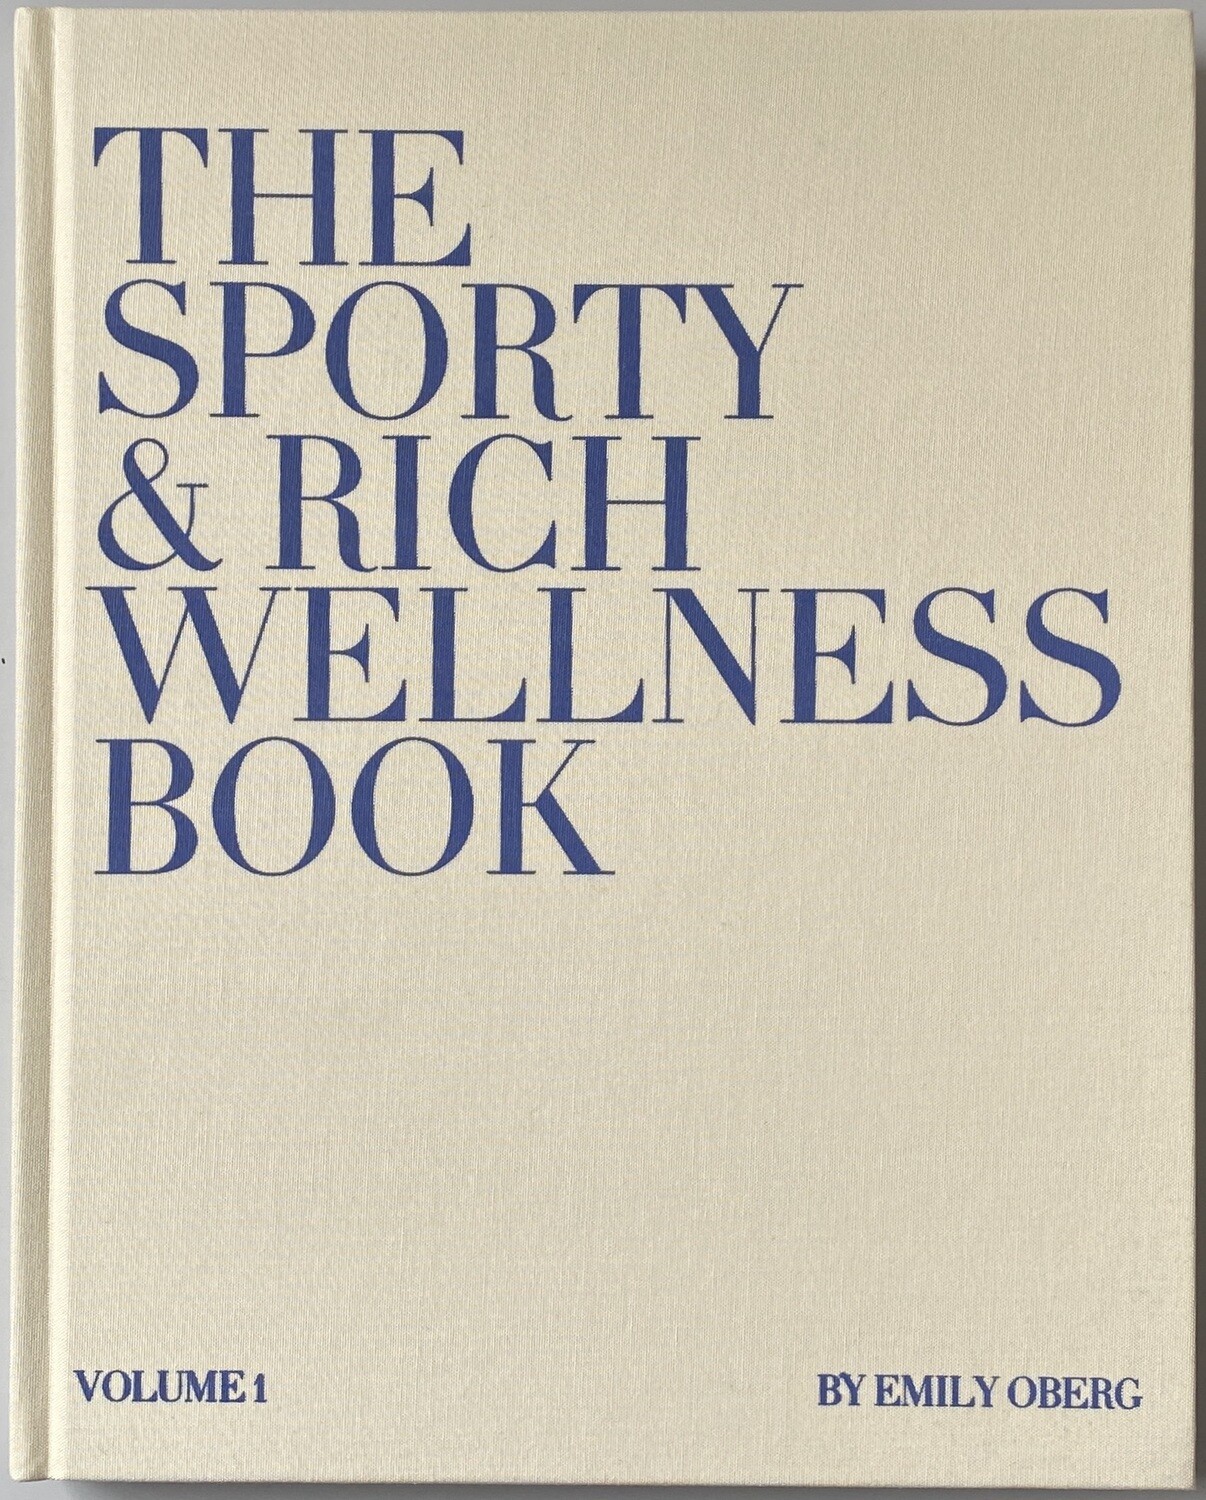 The Sporty & Rich Wellness Book